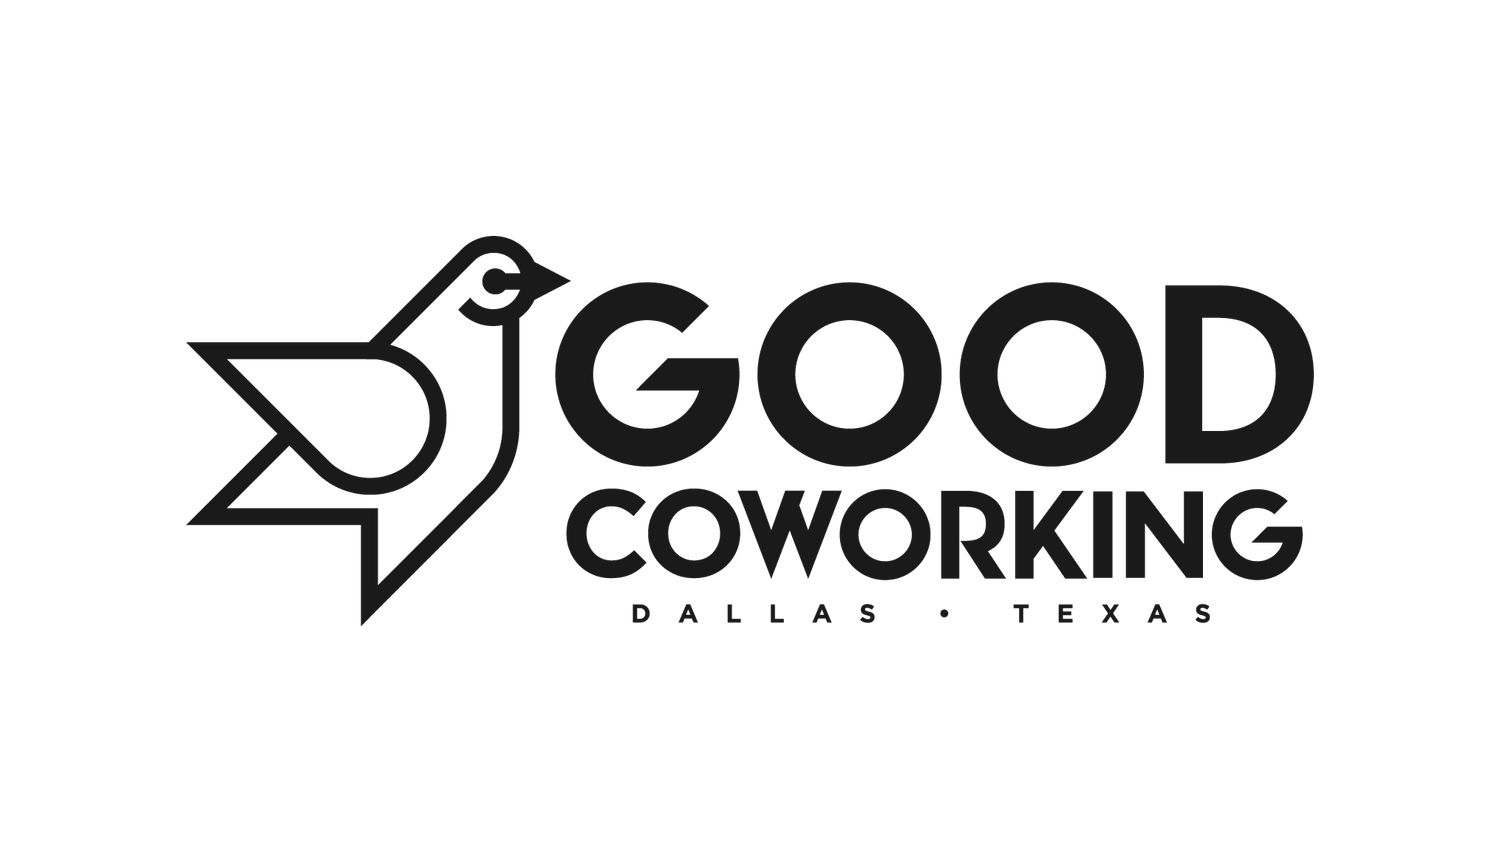 Good Coworking l Dallas&#39; Inclusive, Sustainable Work Space